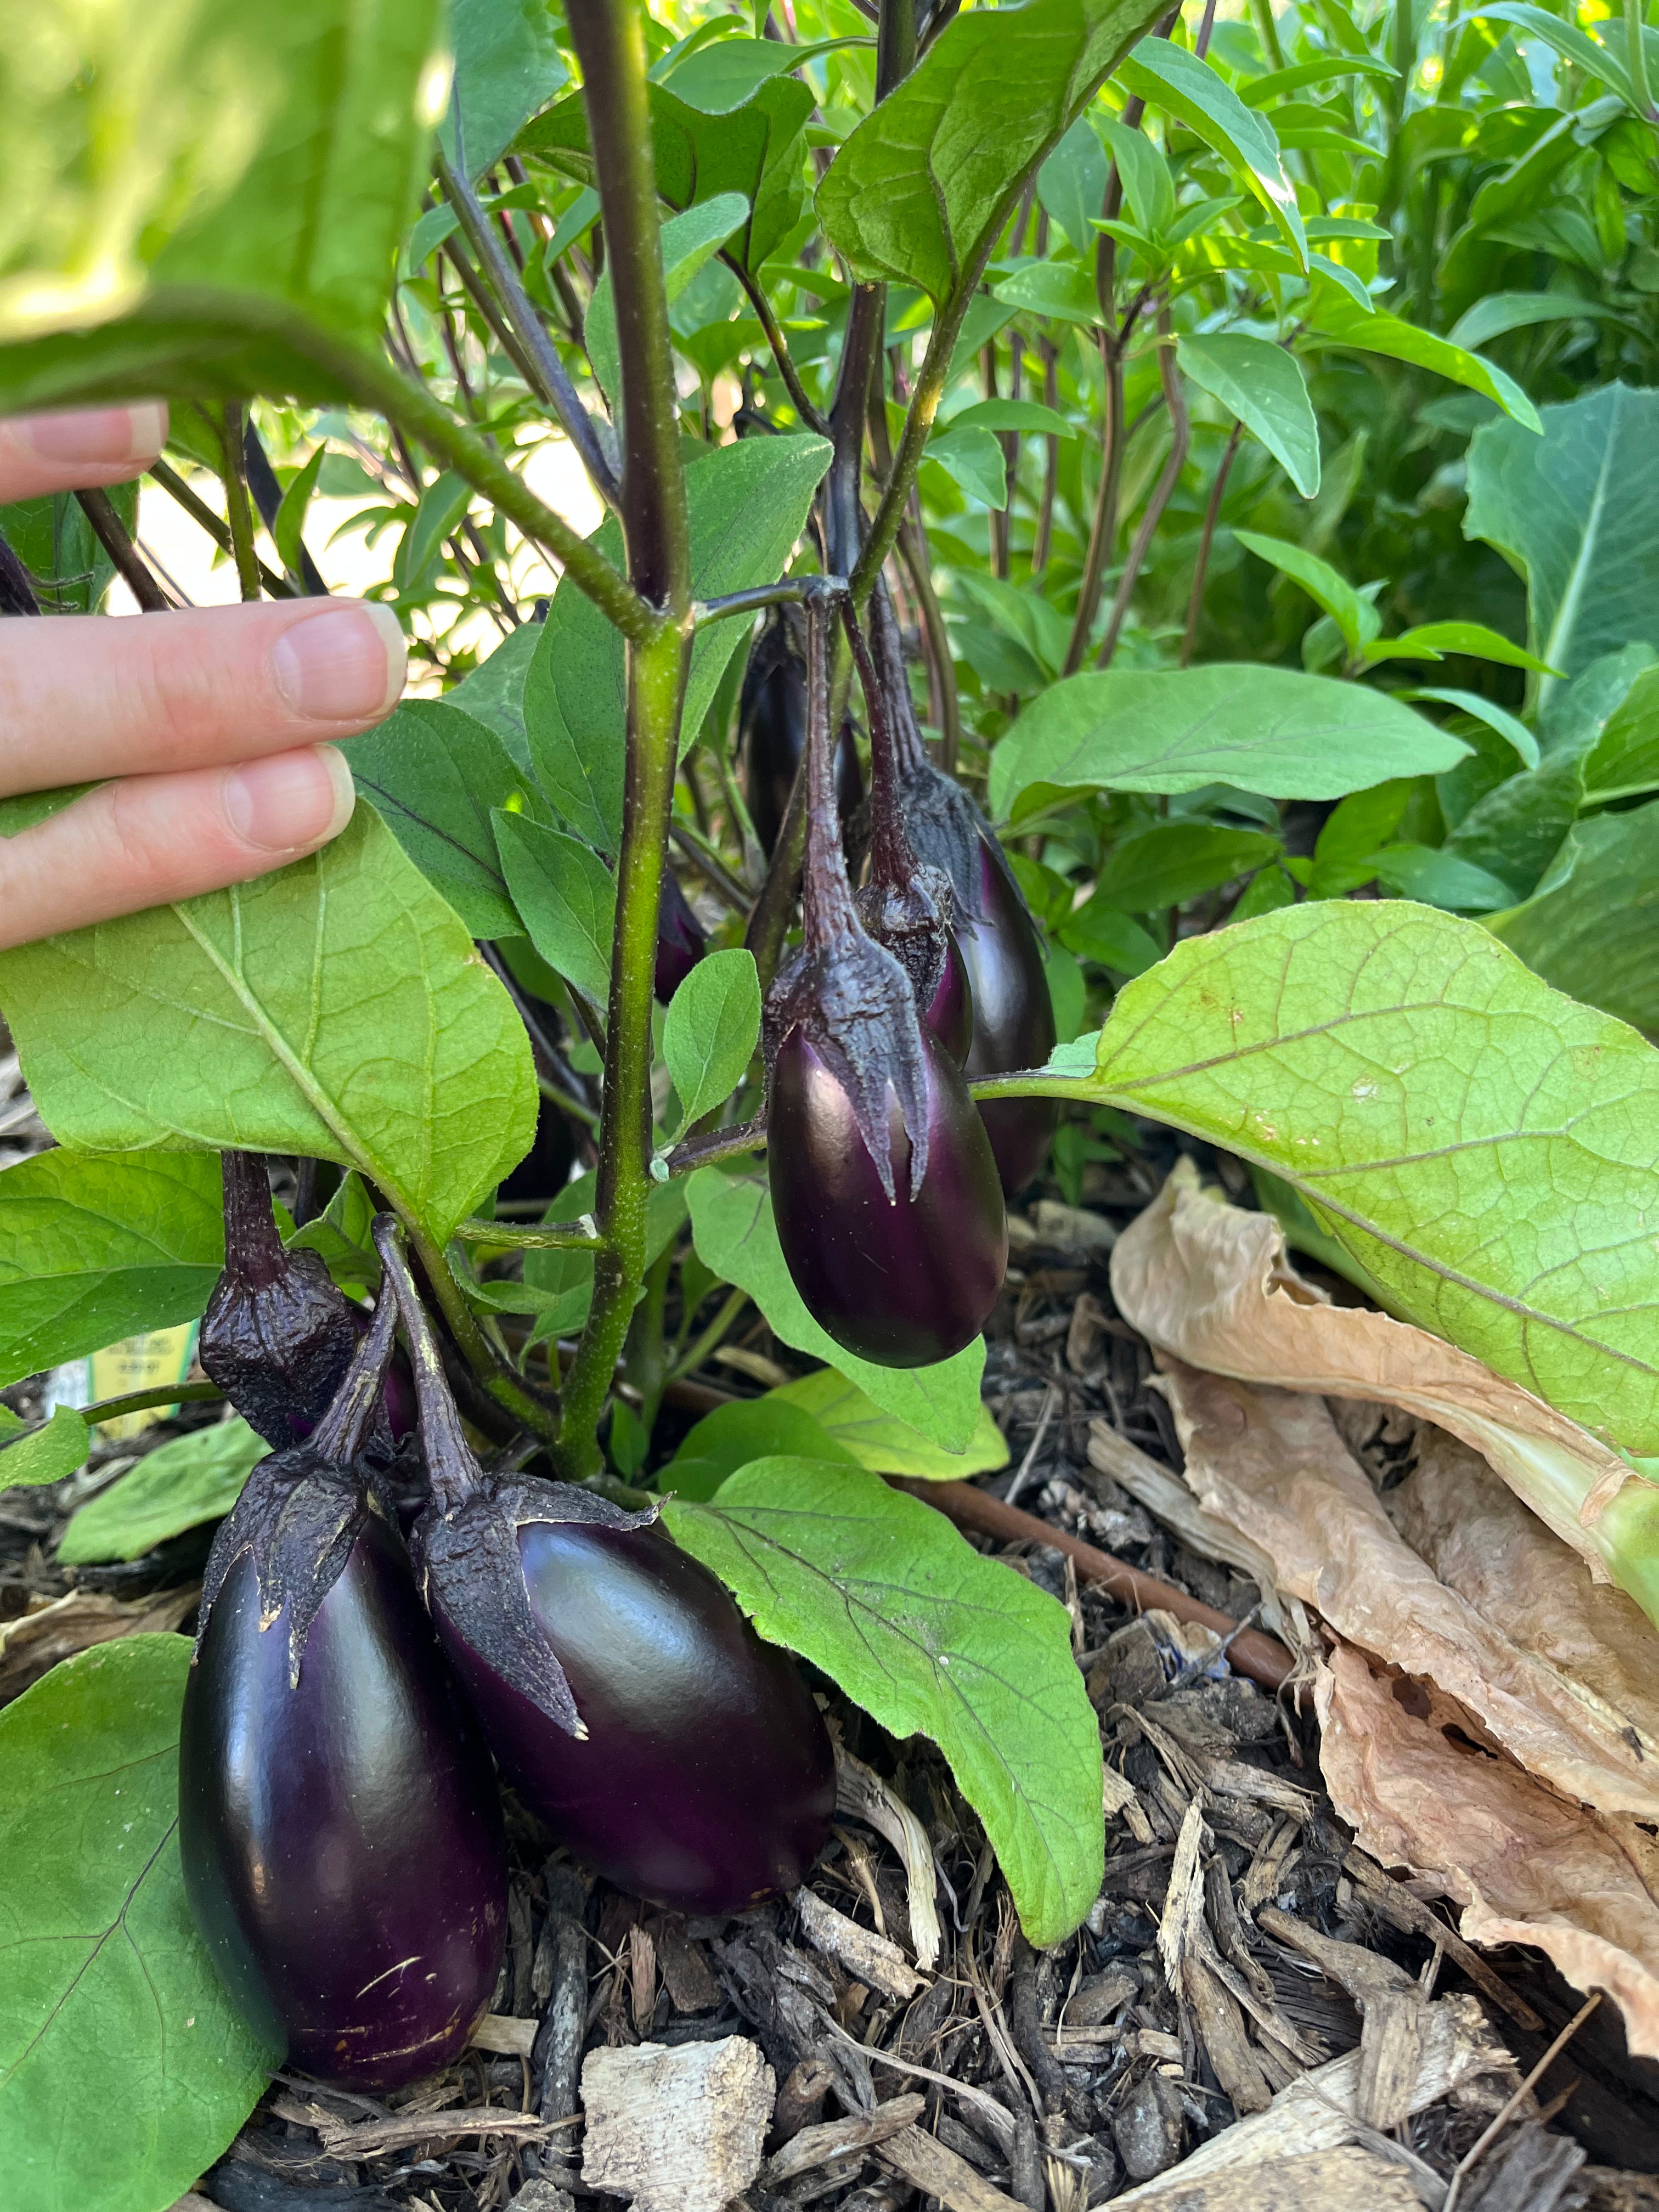 Eggplant grown using Enriched Topsoil